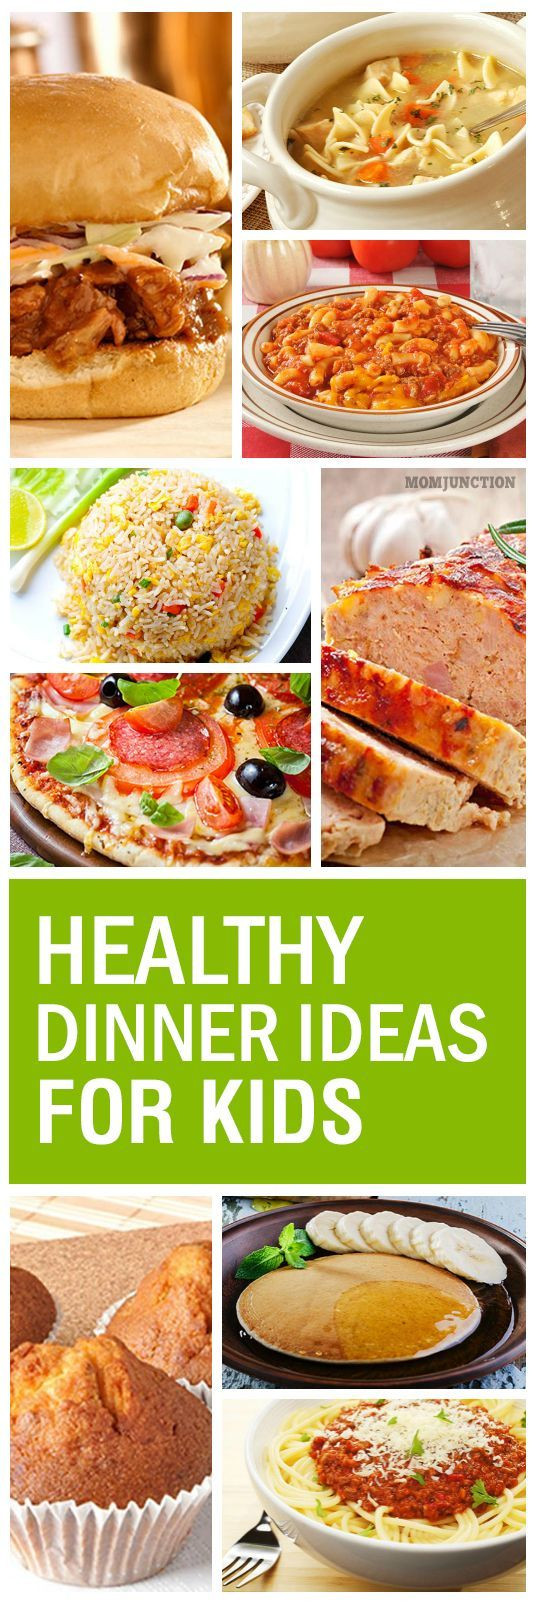 Easy Healthy Dinners For Kids
 15 Quick And Yummy Dinner Recipes For Kids